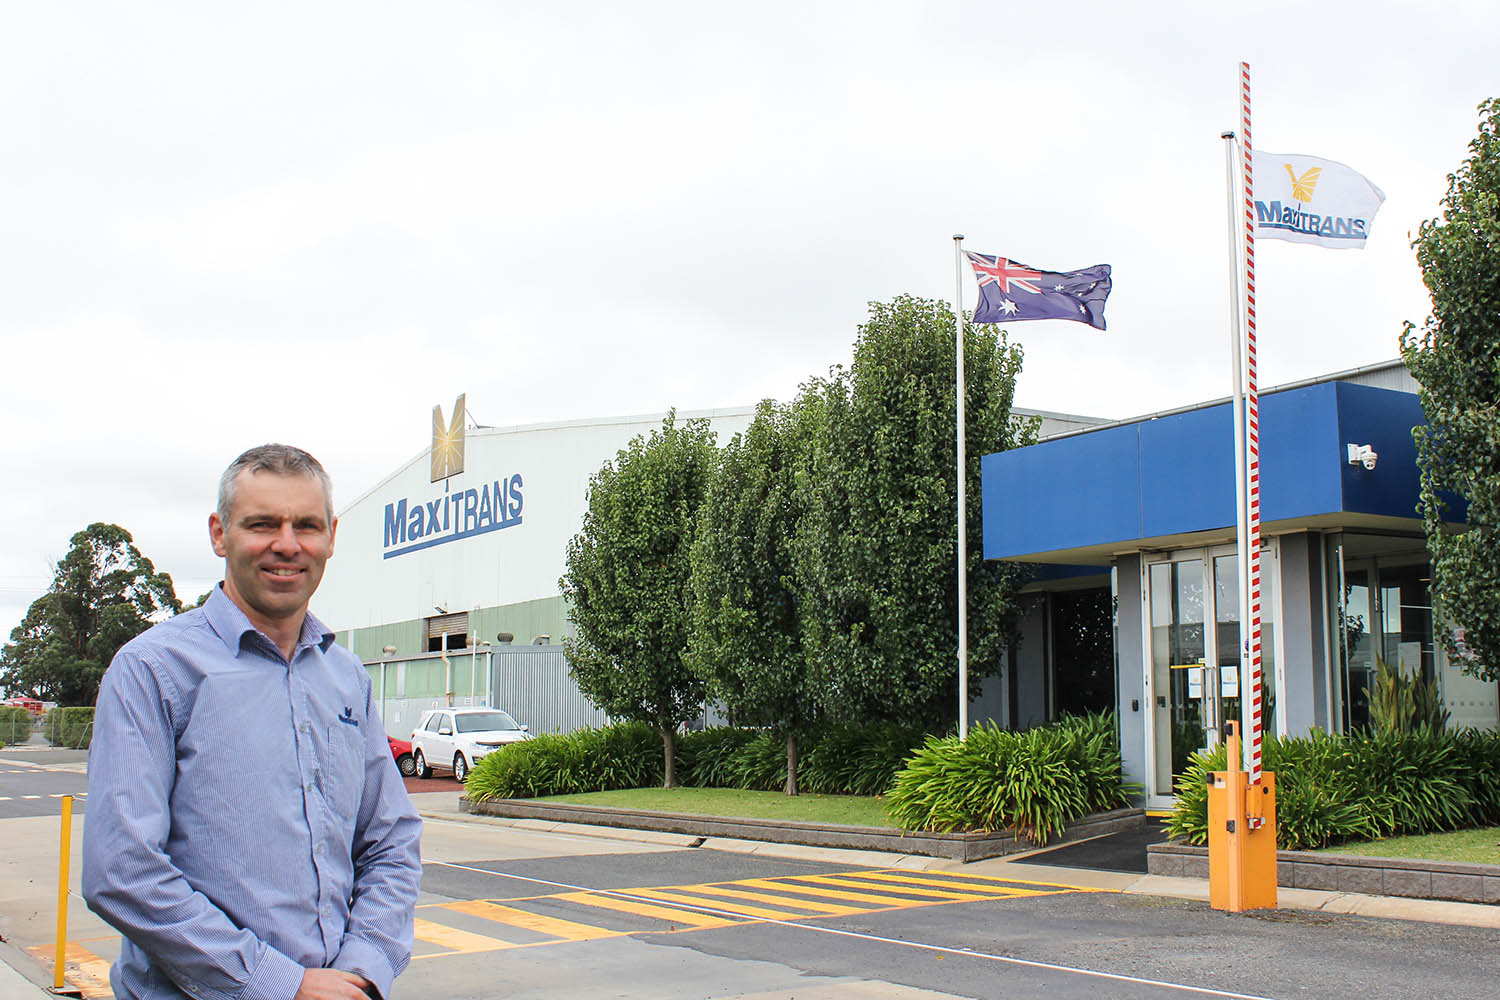 A country boy at heart, Daniel McNaulty manages product development for MaxiTRANS, creating and development new products that deliver efficiencies for MaxiTRANS’ customers